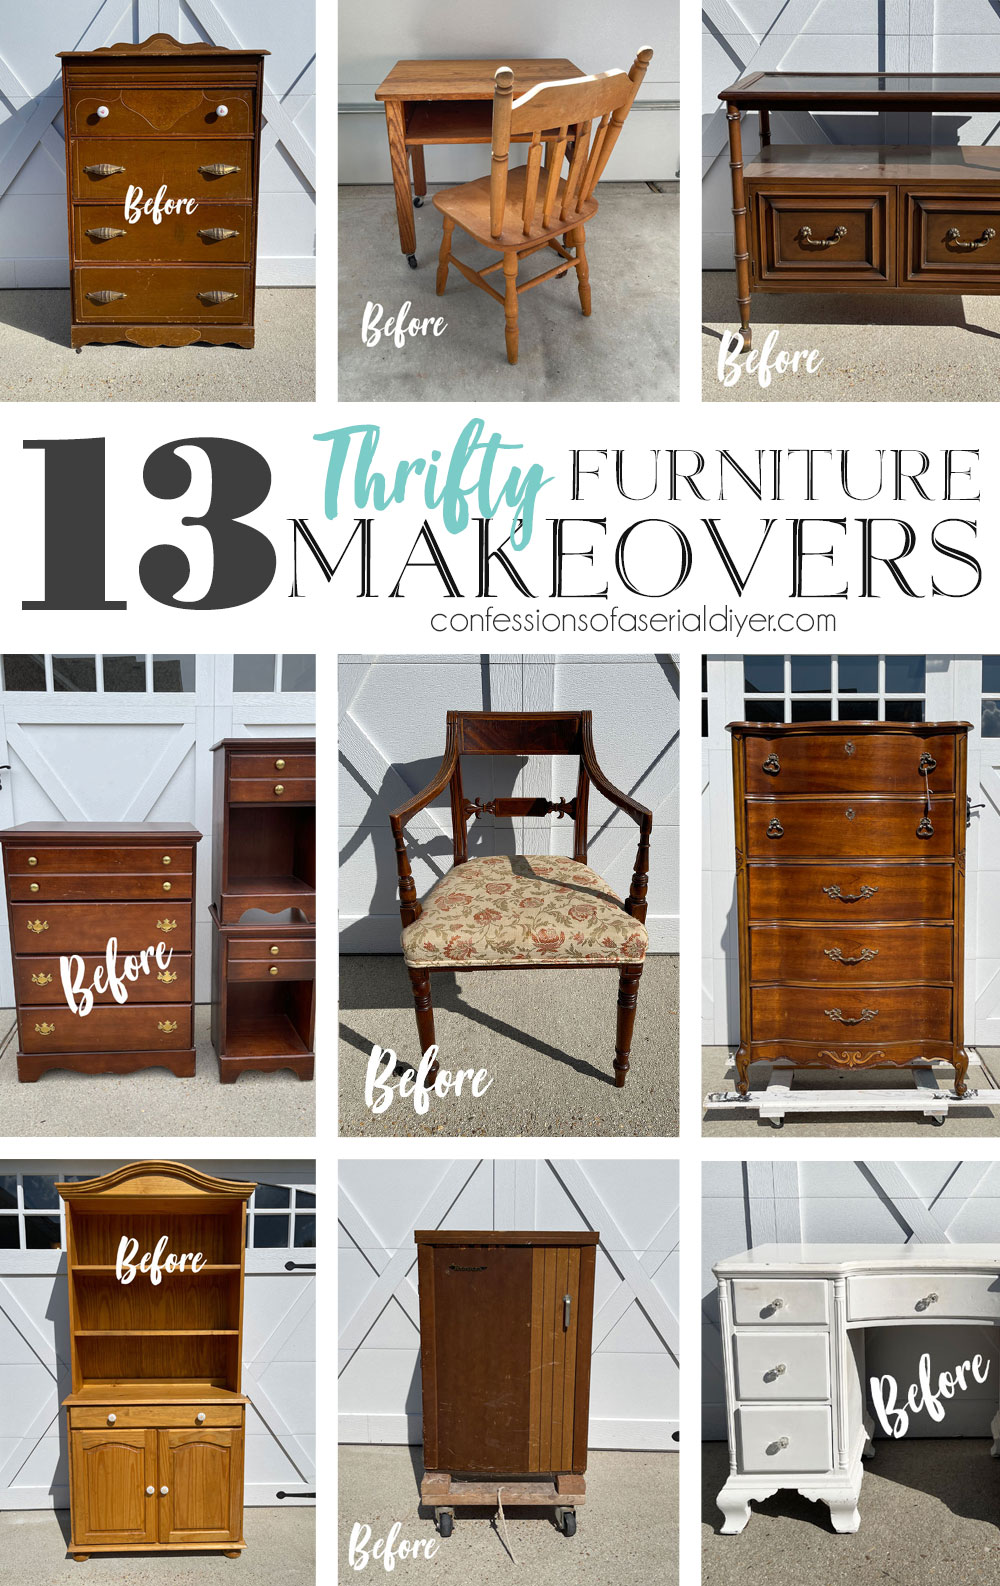 13 Thrifty Furniture Makeovers